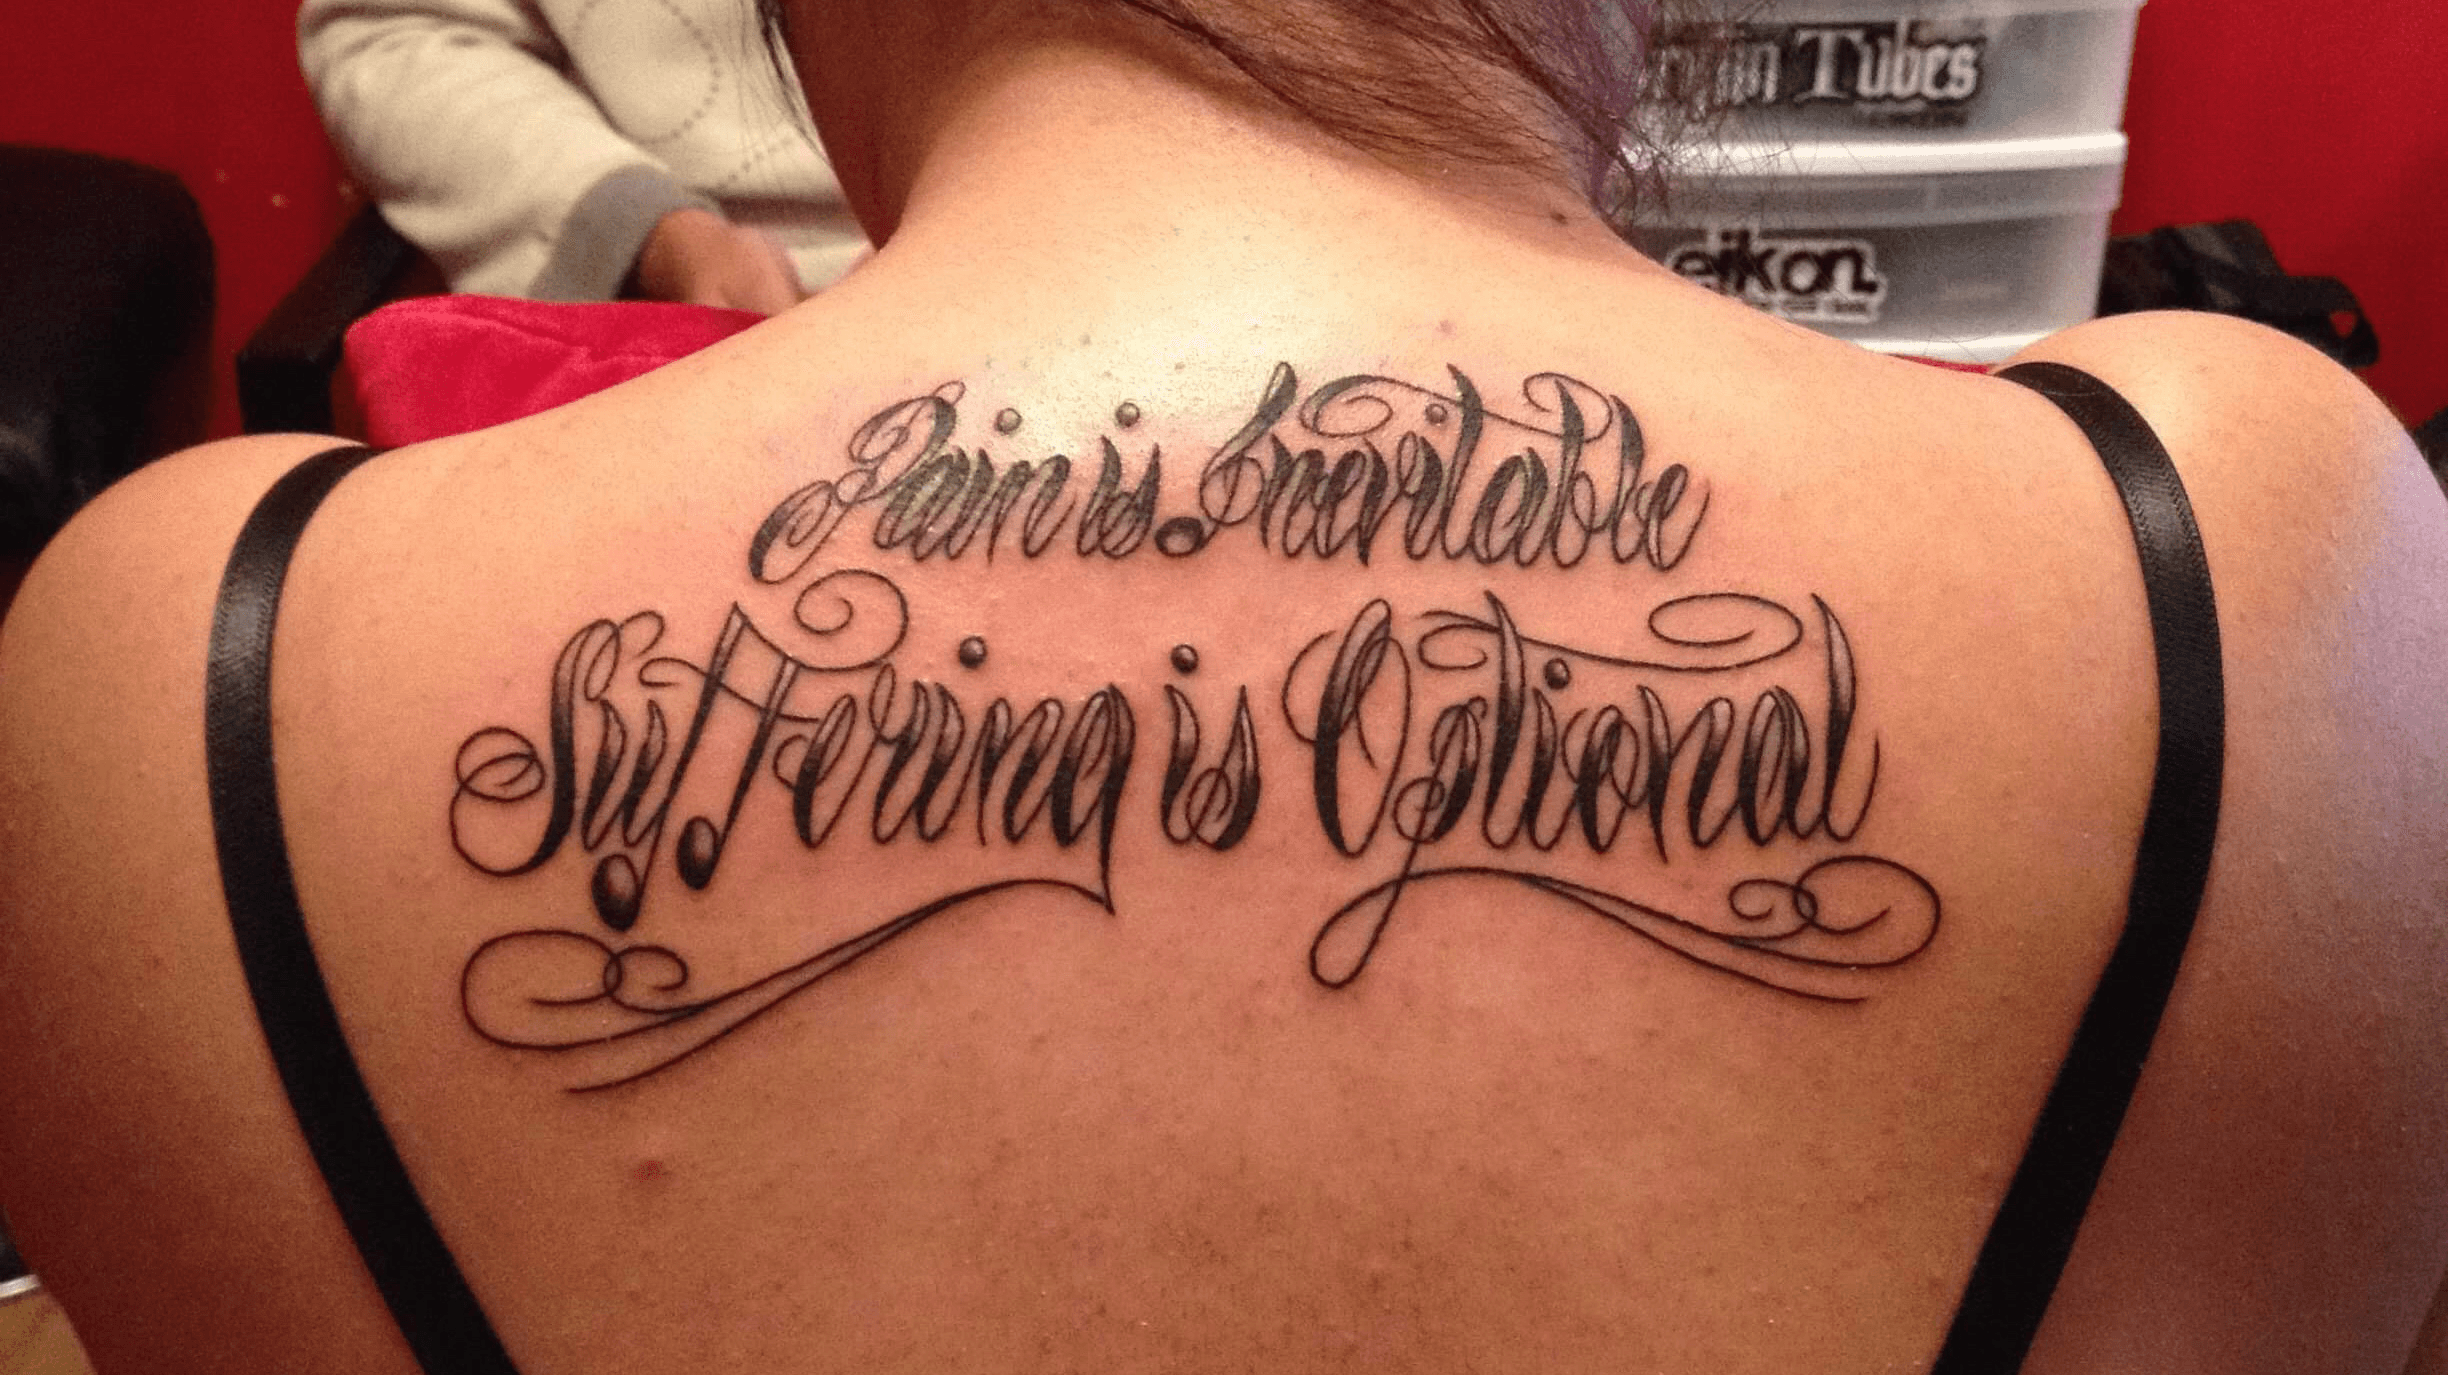 Tattoo uploaded by Rye Clavering  Custom Font by yours truly  Pain  is InevitableSuffering is Optional  Tattoodo